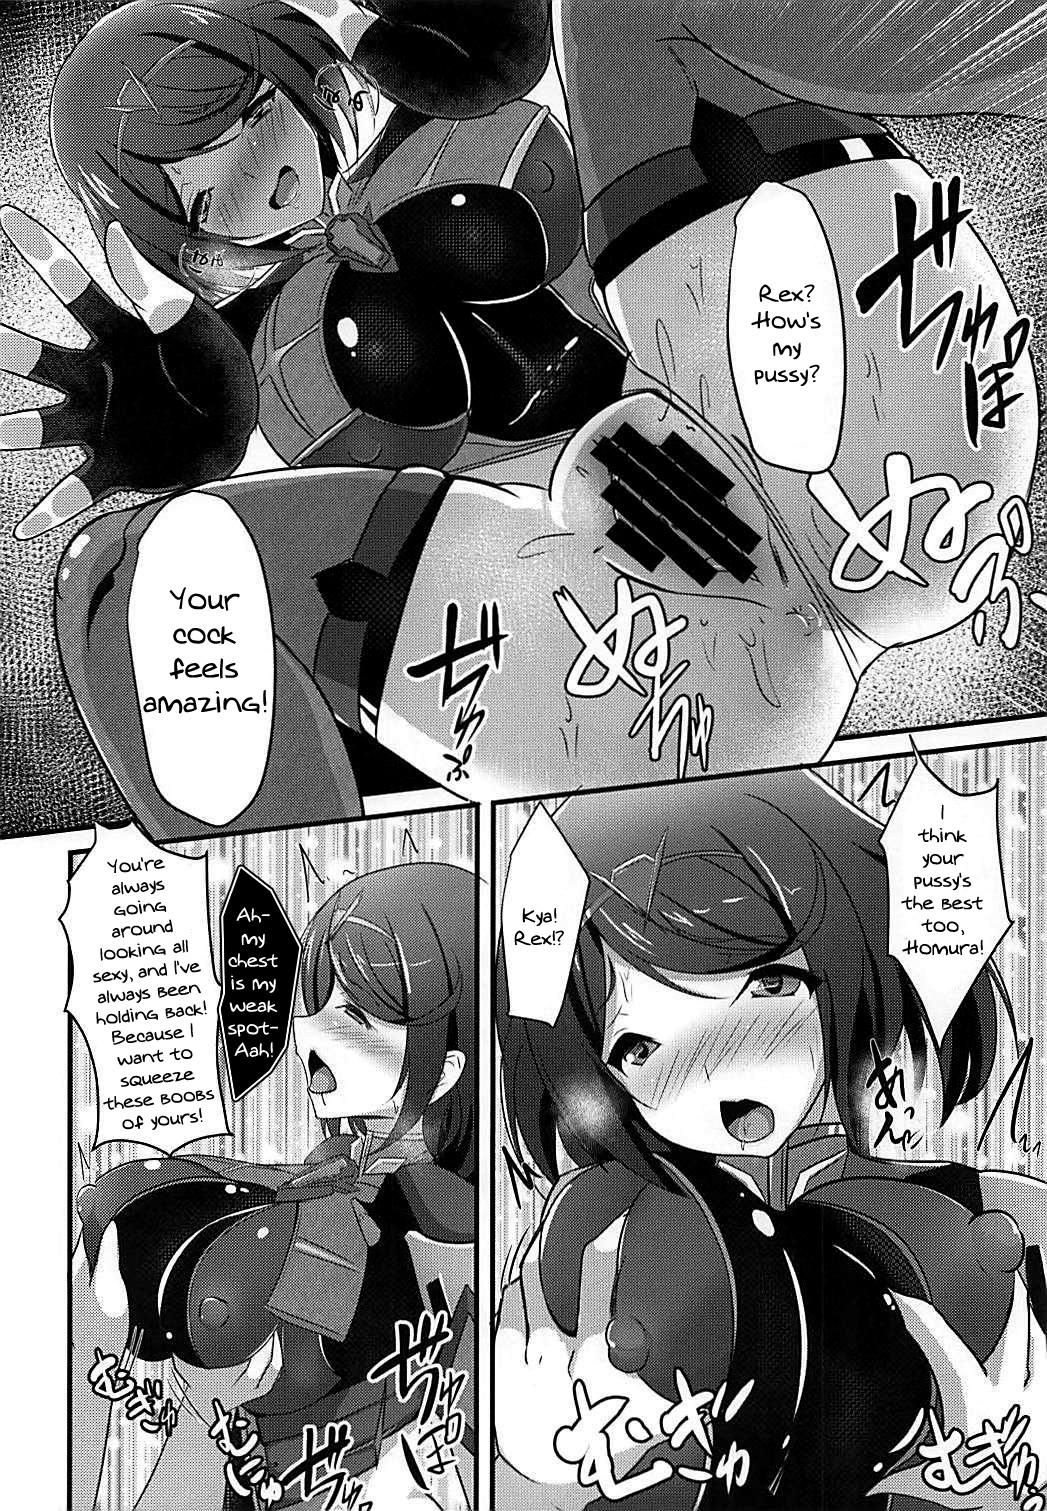 Perfect Pussy HOMUHIKAex - Xenoblade chronicles 2 Rough Porn - Page 11